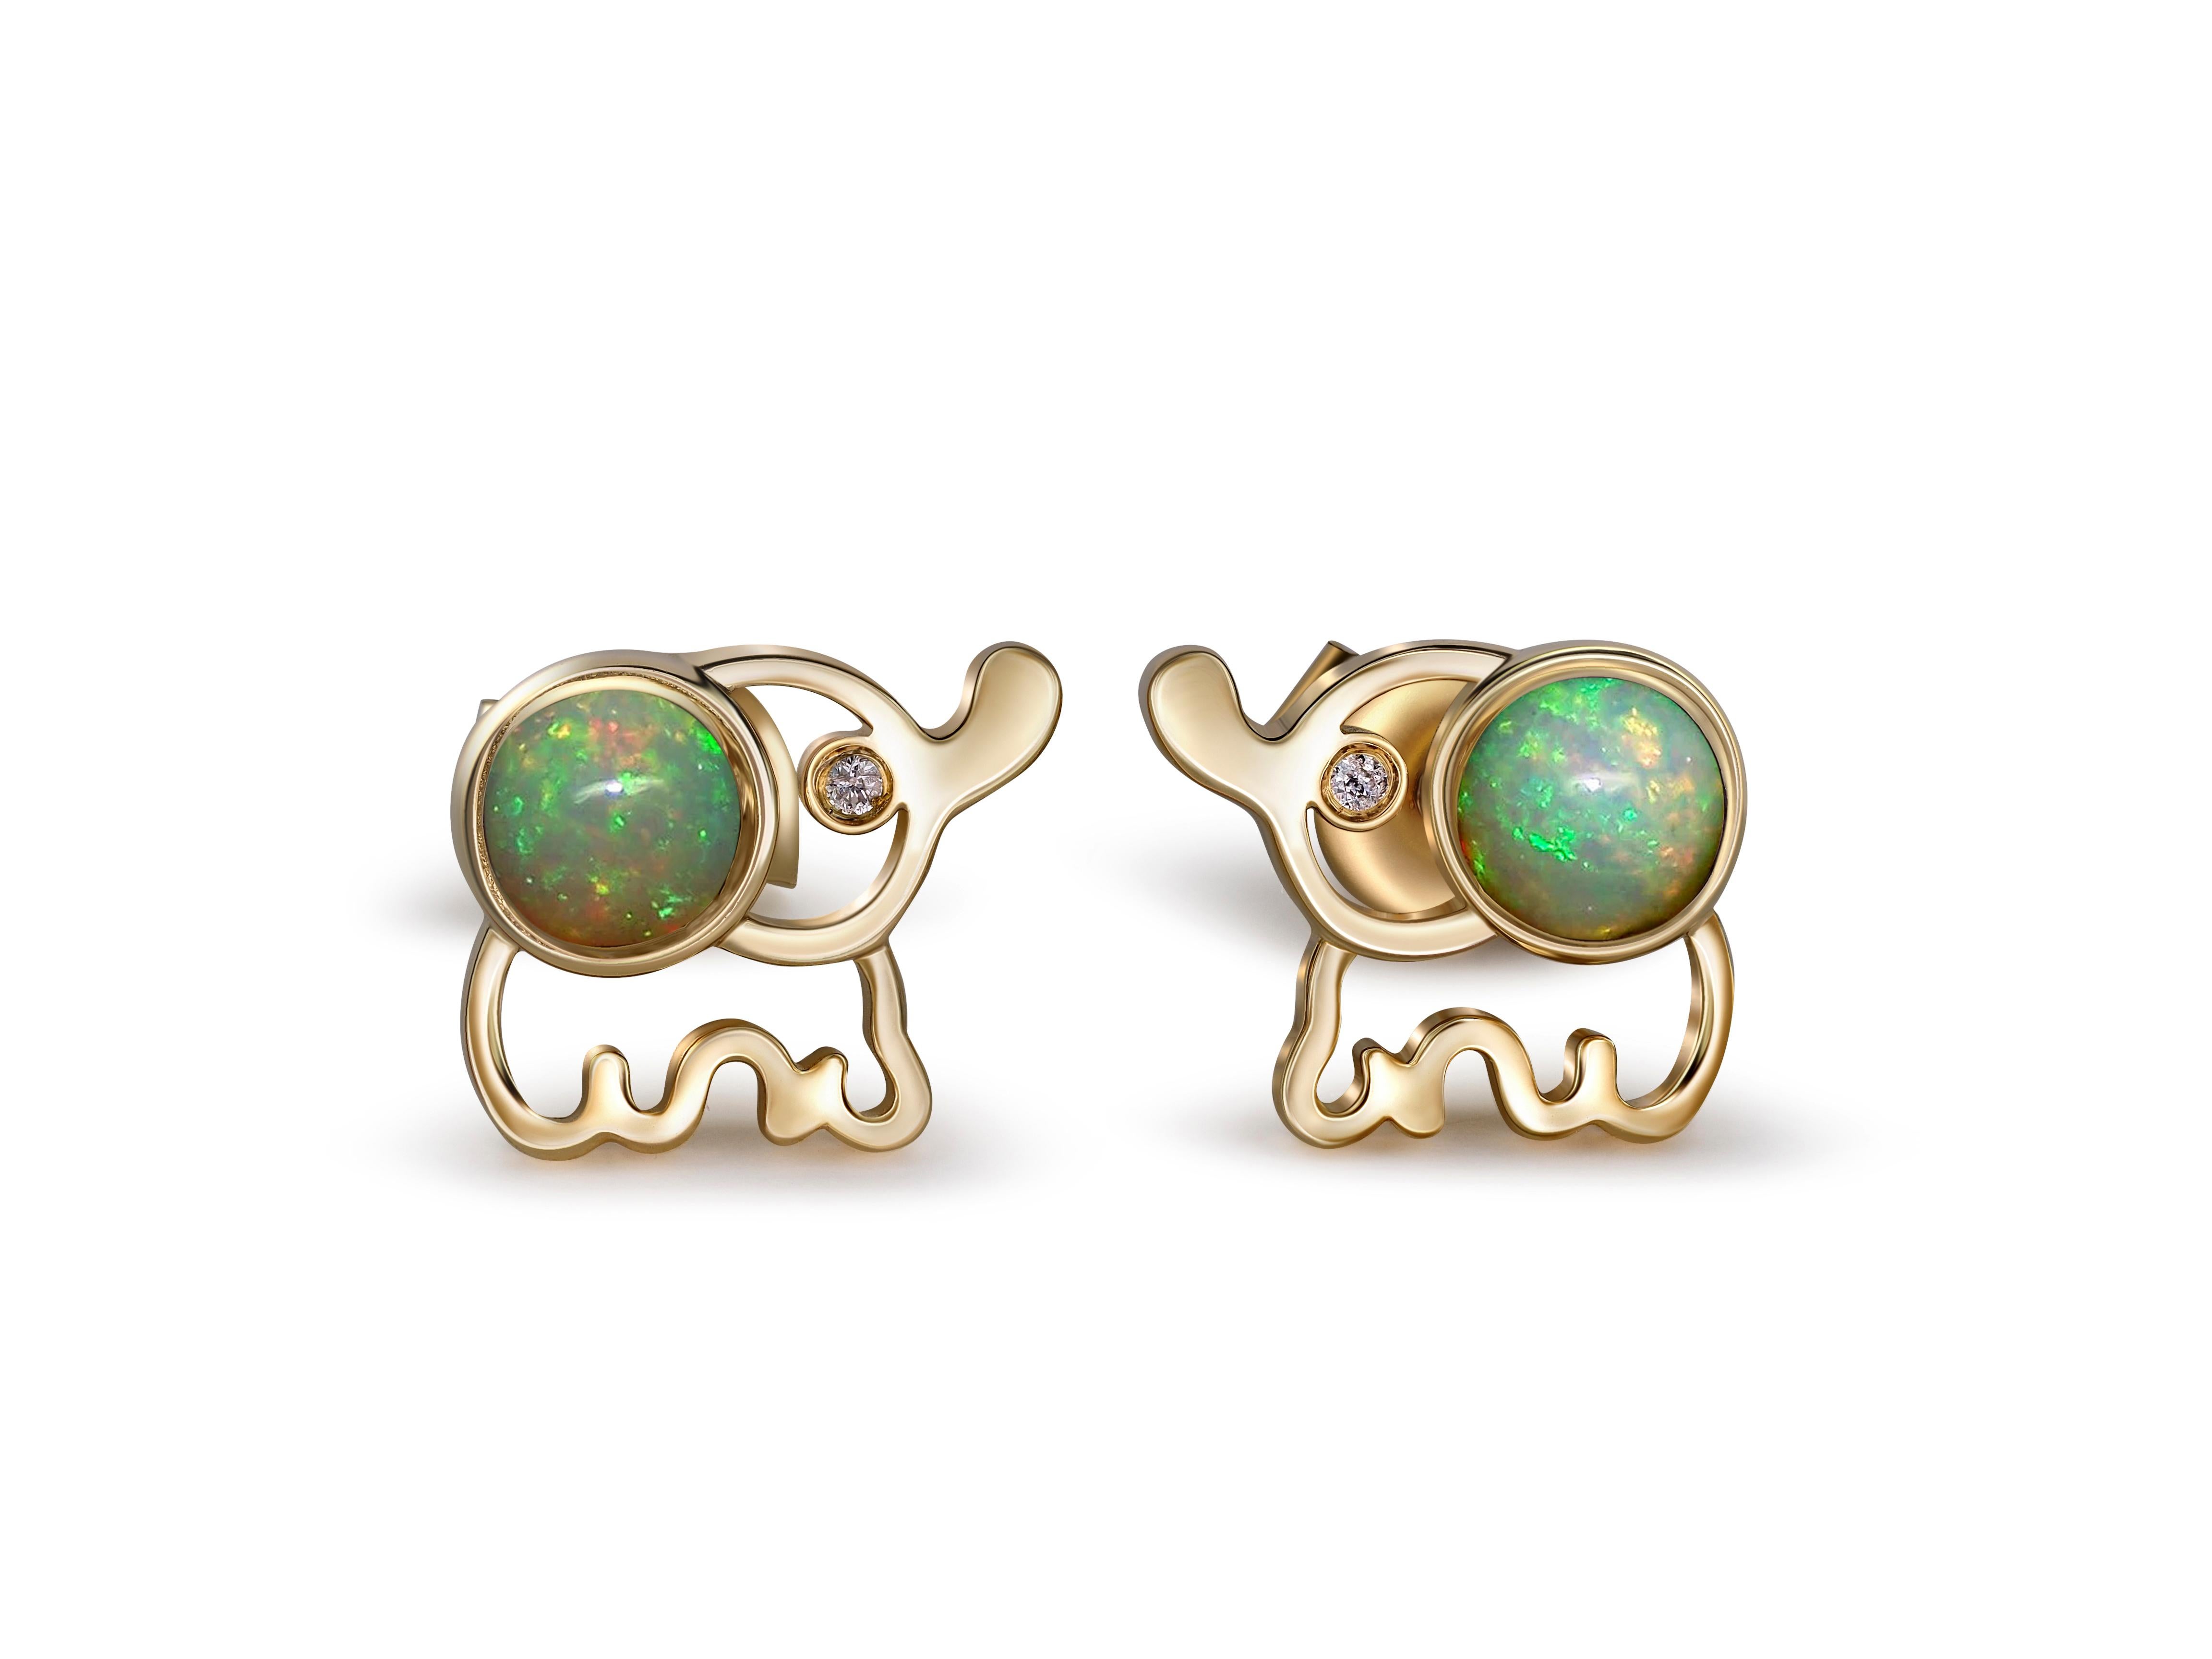 Elephant Opal 14k gold earrings studs. 
Animal design gold earrings. Multicolor opal earrings. Cabochon opal earrings. October birthstone earrings. 

Total weight: 2.2 g.
Size: 7 x 8 mm.
Central stones: Natural opals - 2 pieces
Weight: approx 0.85